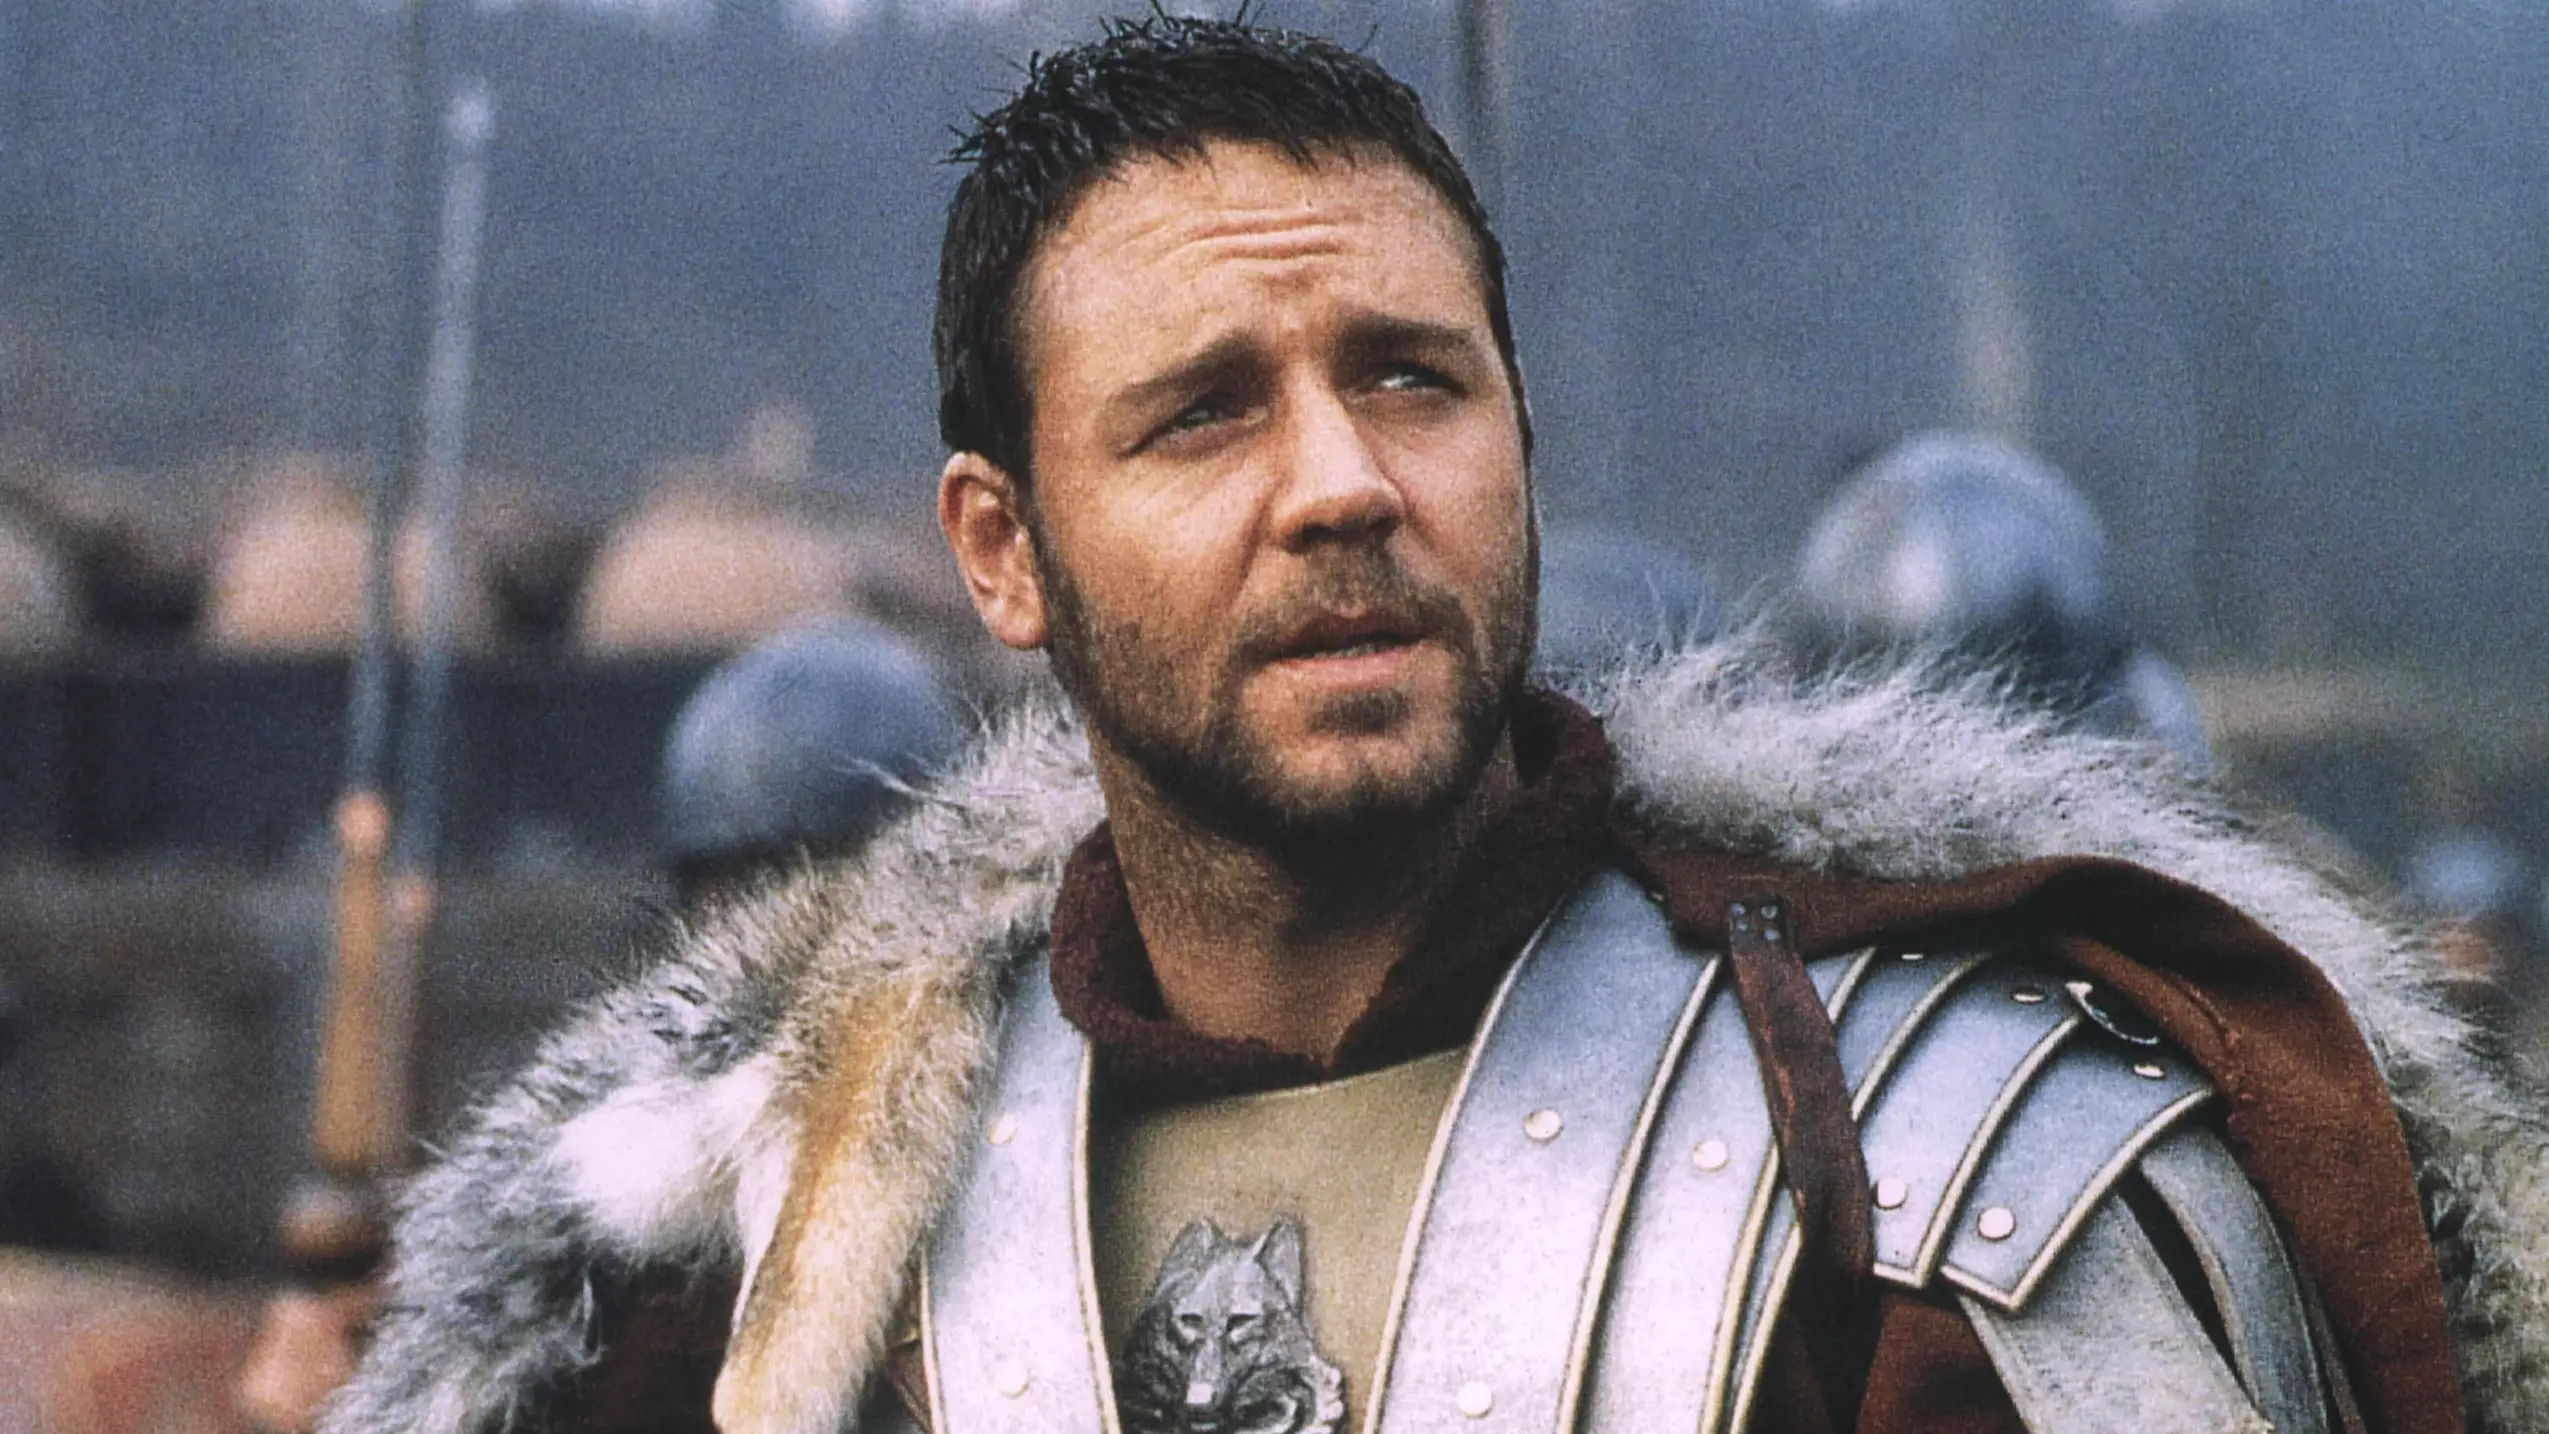 Gladiator Director Ridley Scott Is Working On Script For Sequel